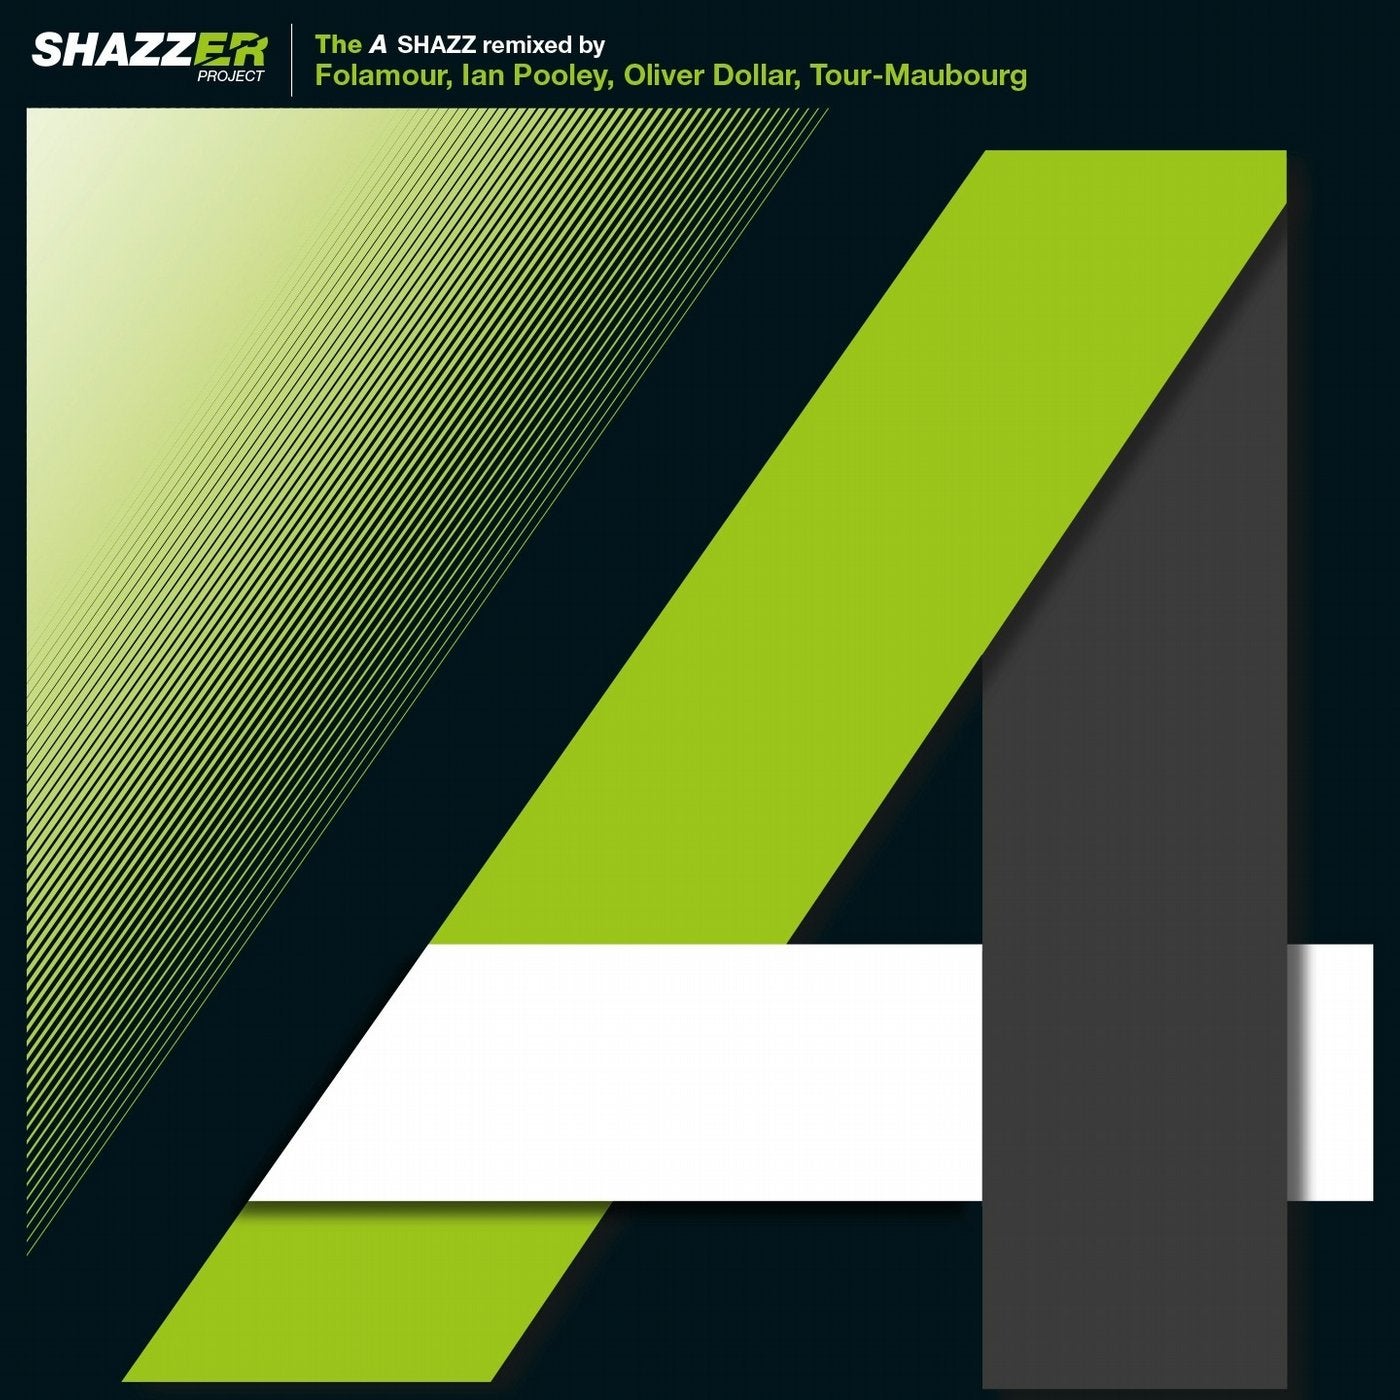 Shazzer Project - The "A"